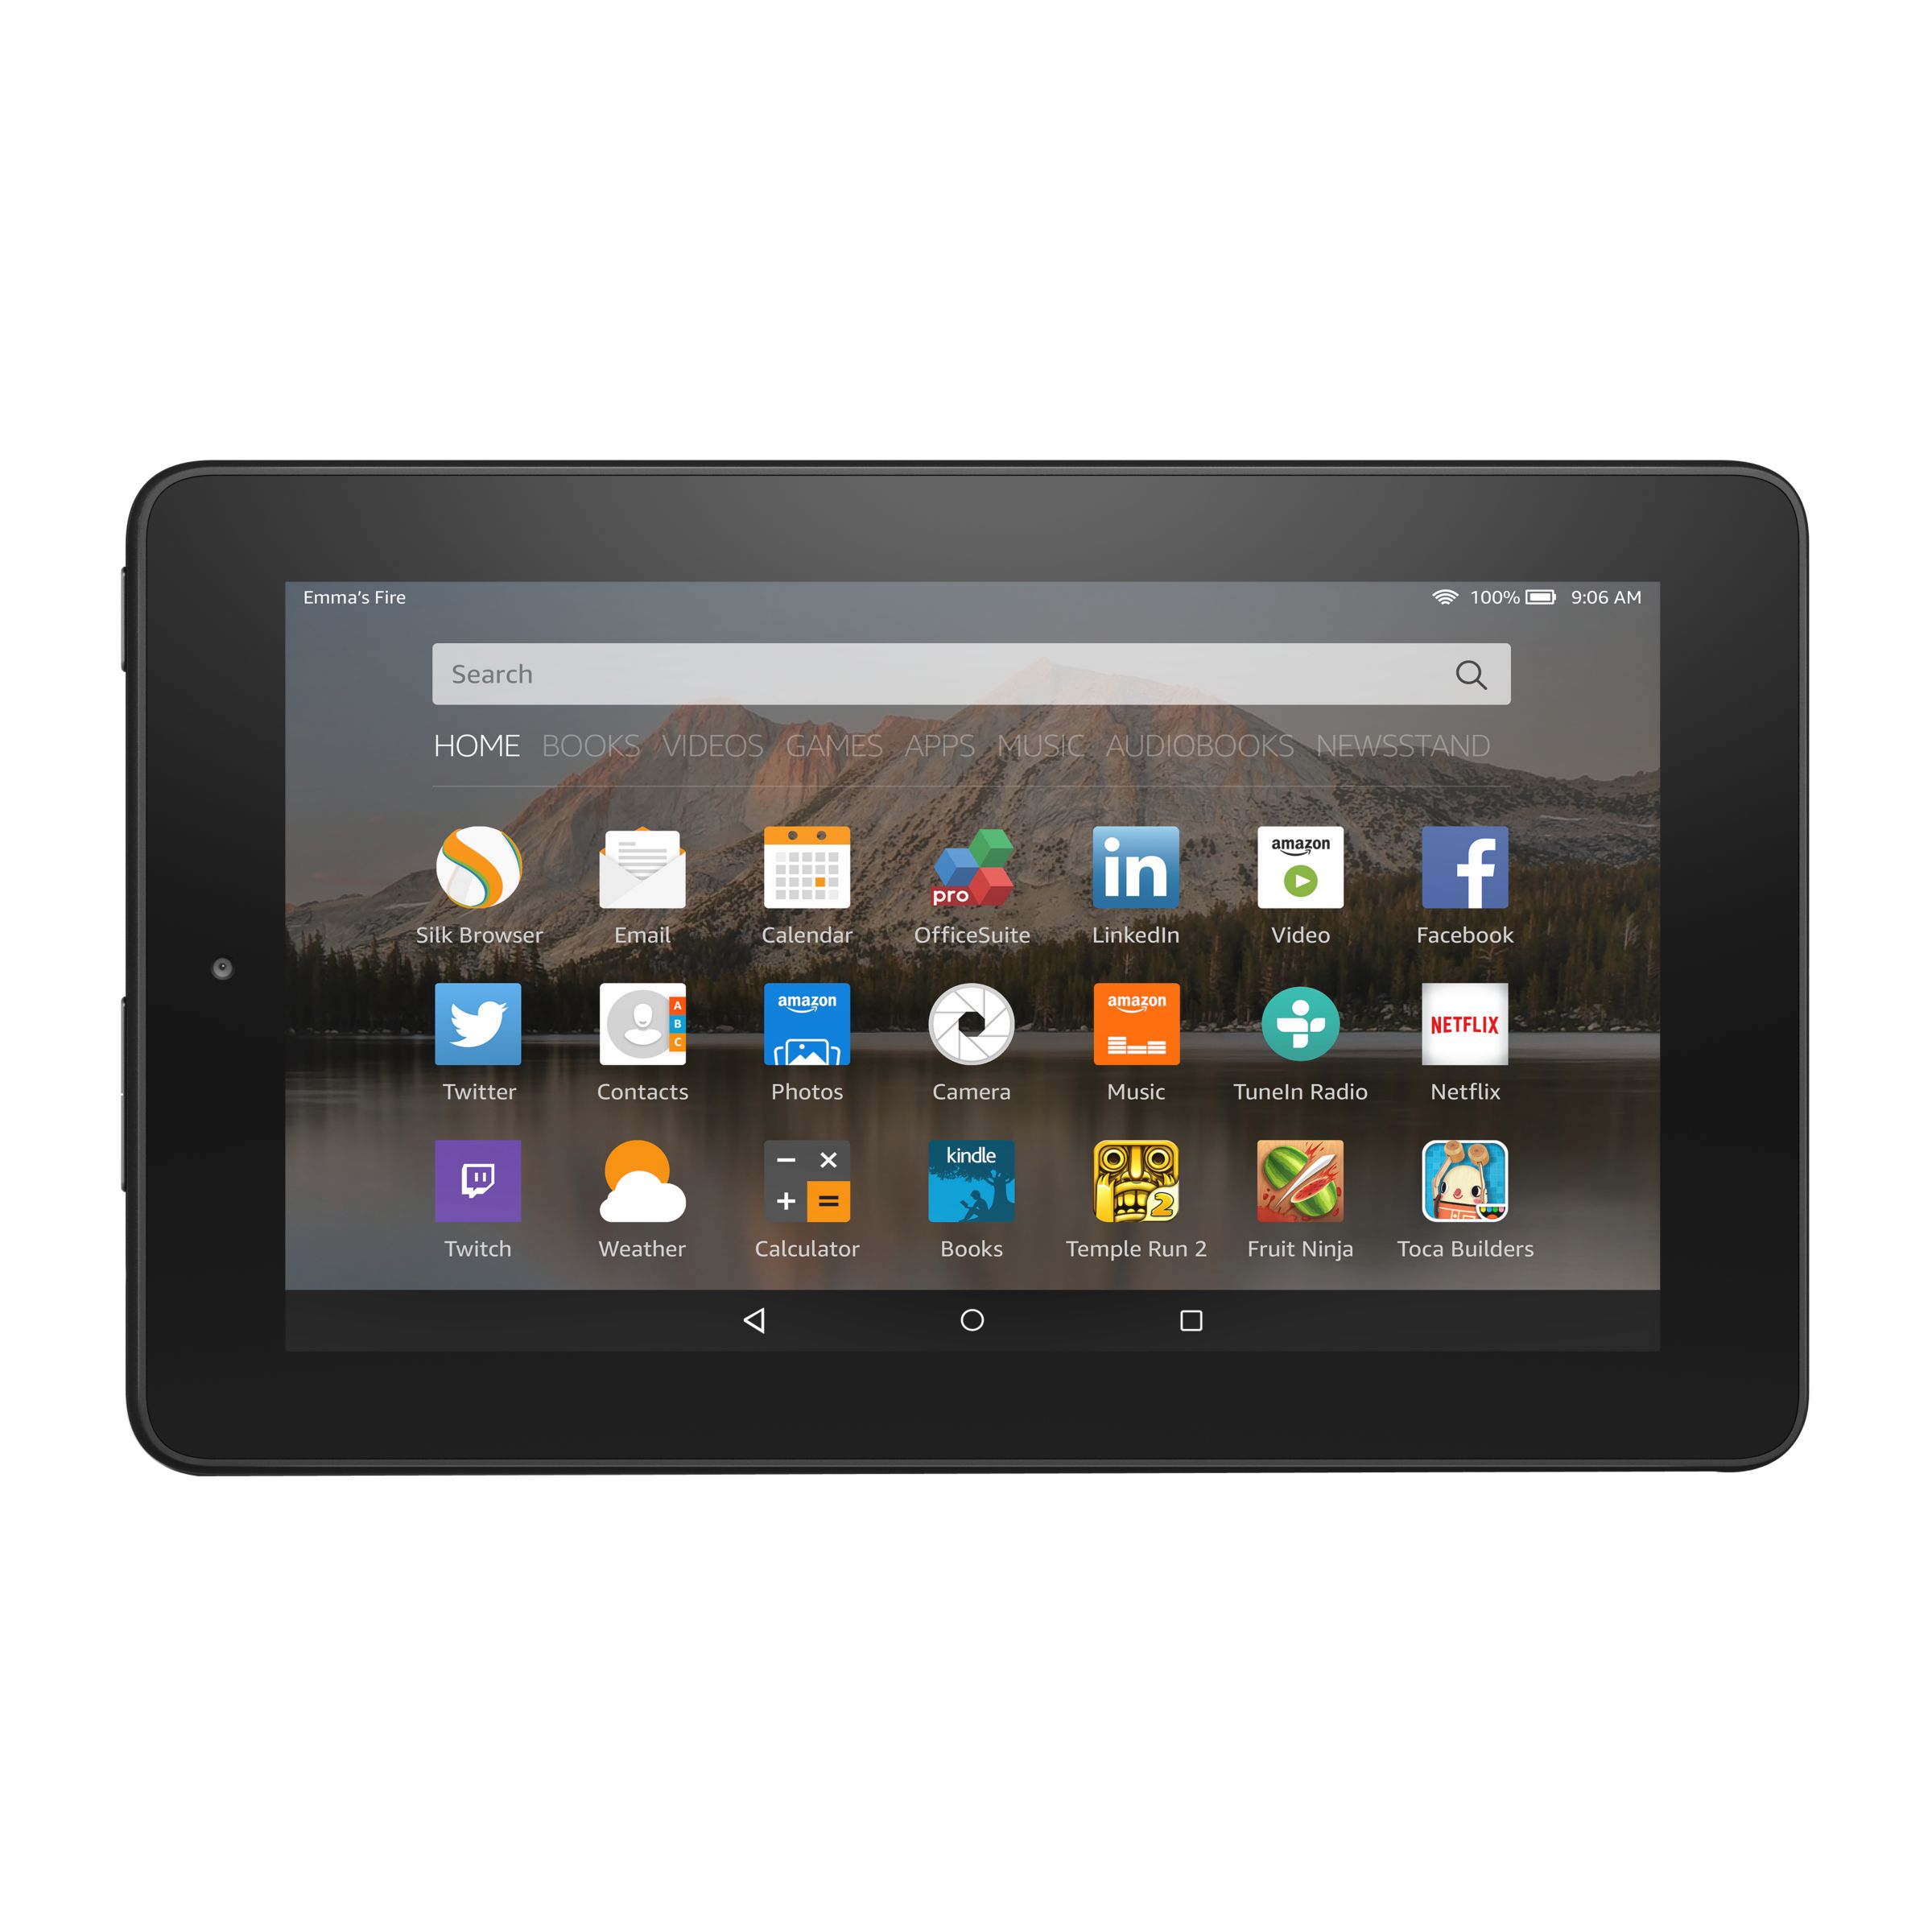 Amazon Fire 7 Tablet, Quad-core, Fire OS, Wi-Fi, 8GB, 7"